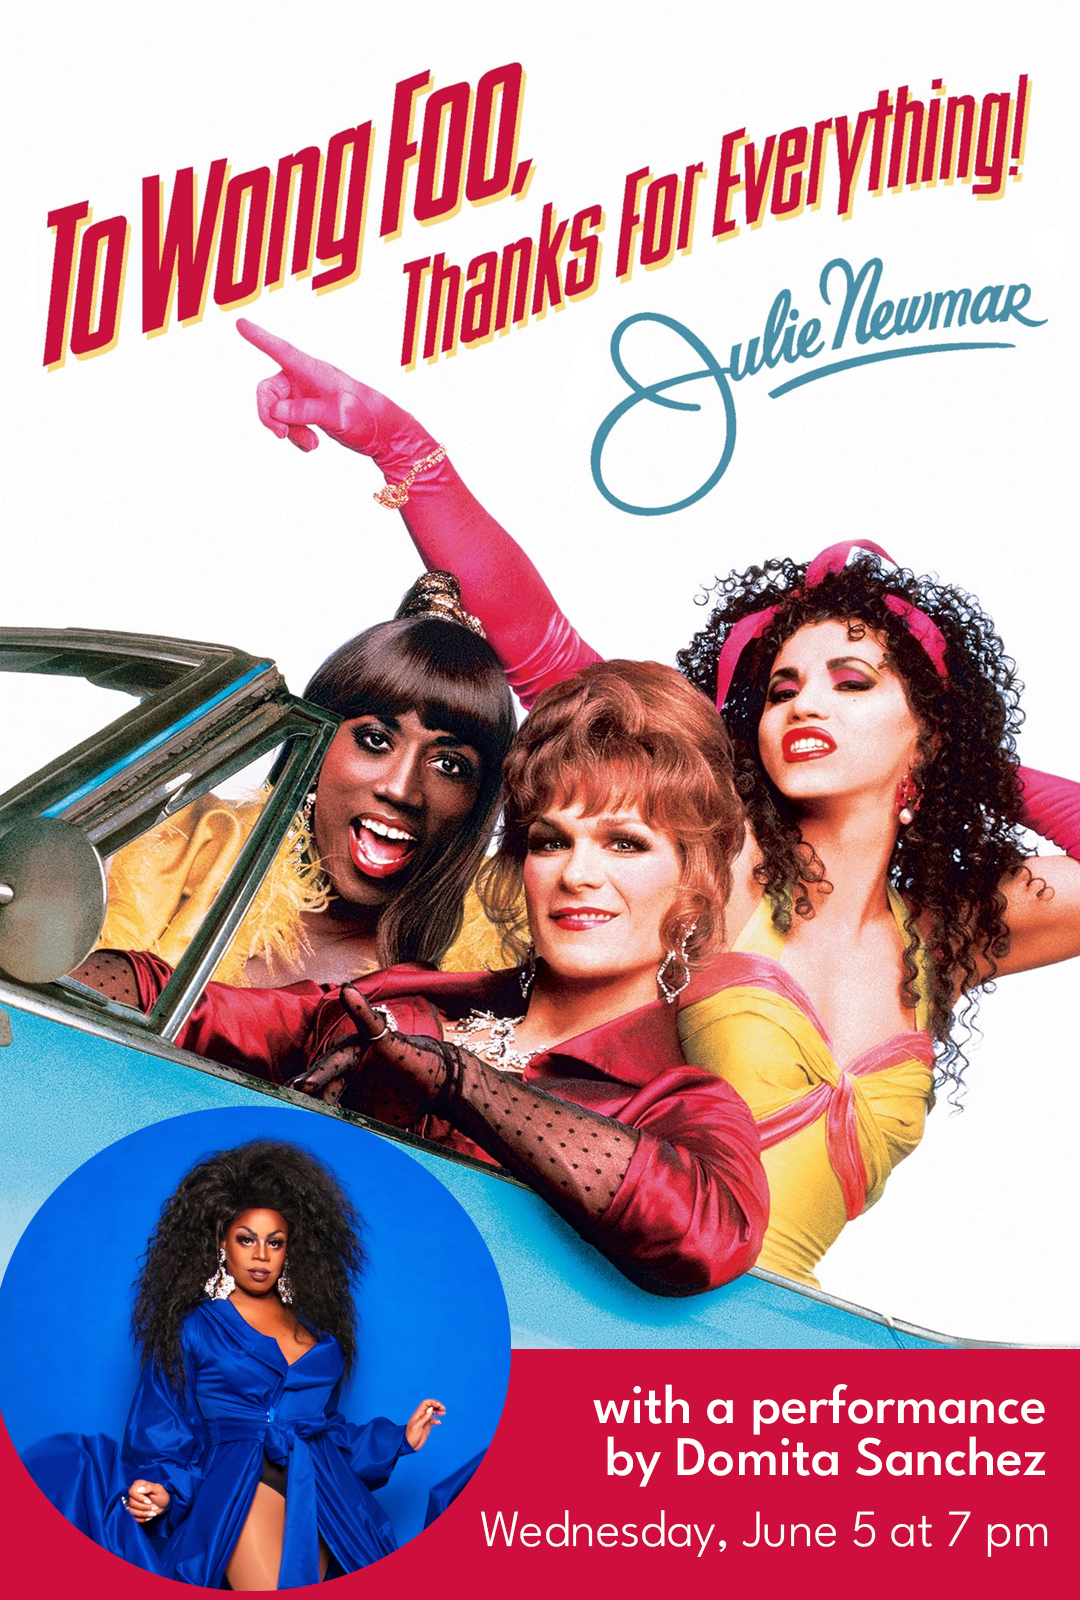 An image of three drag queens in a convertible.